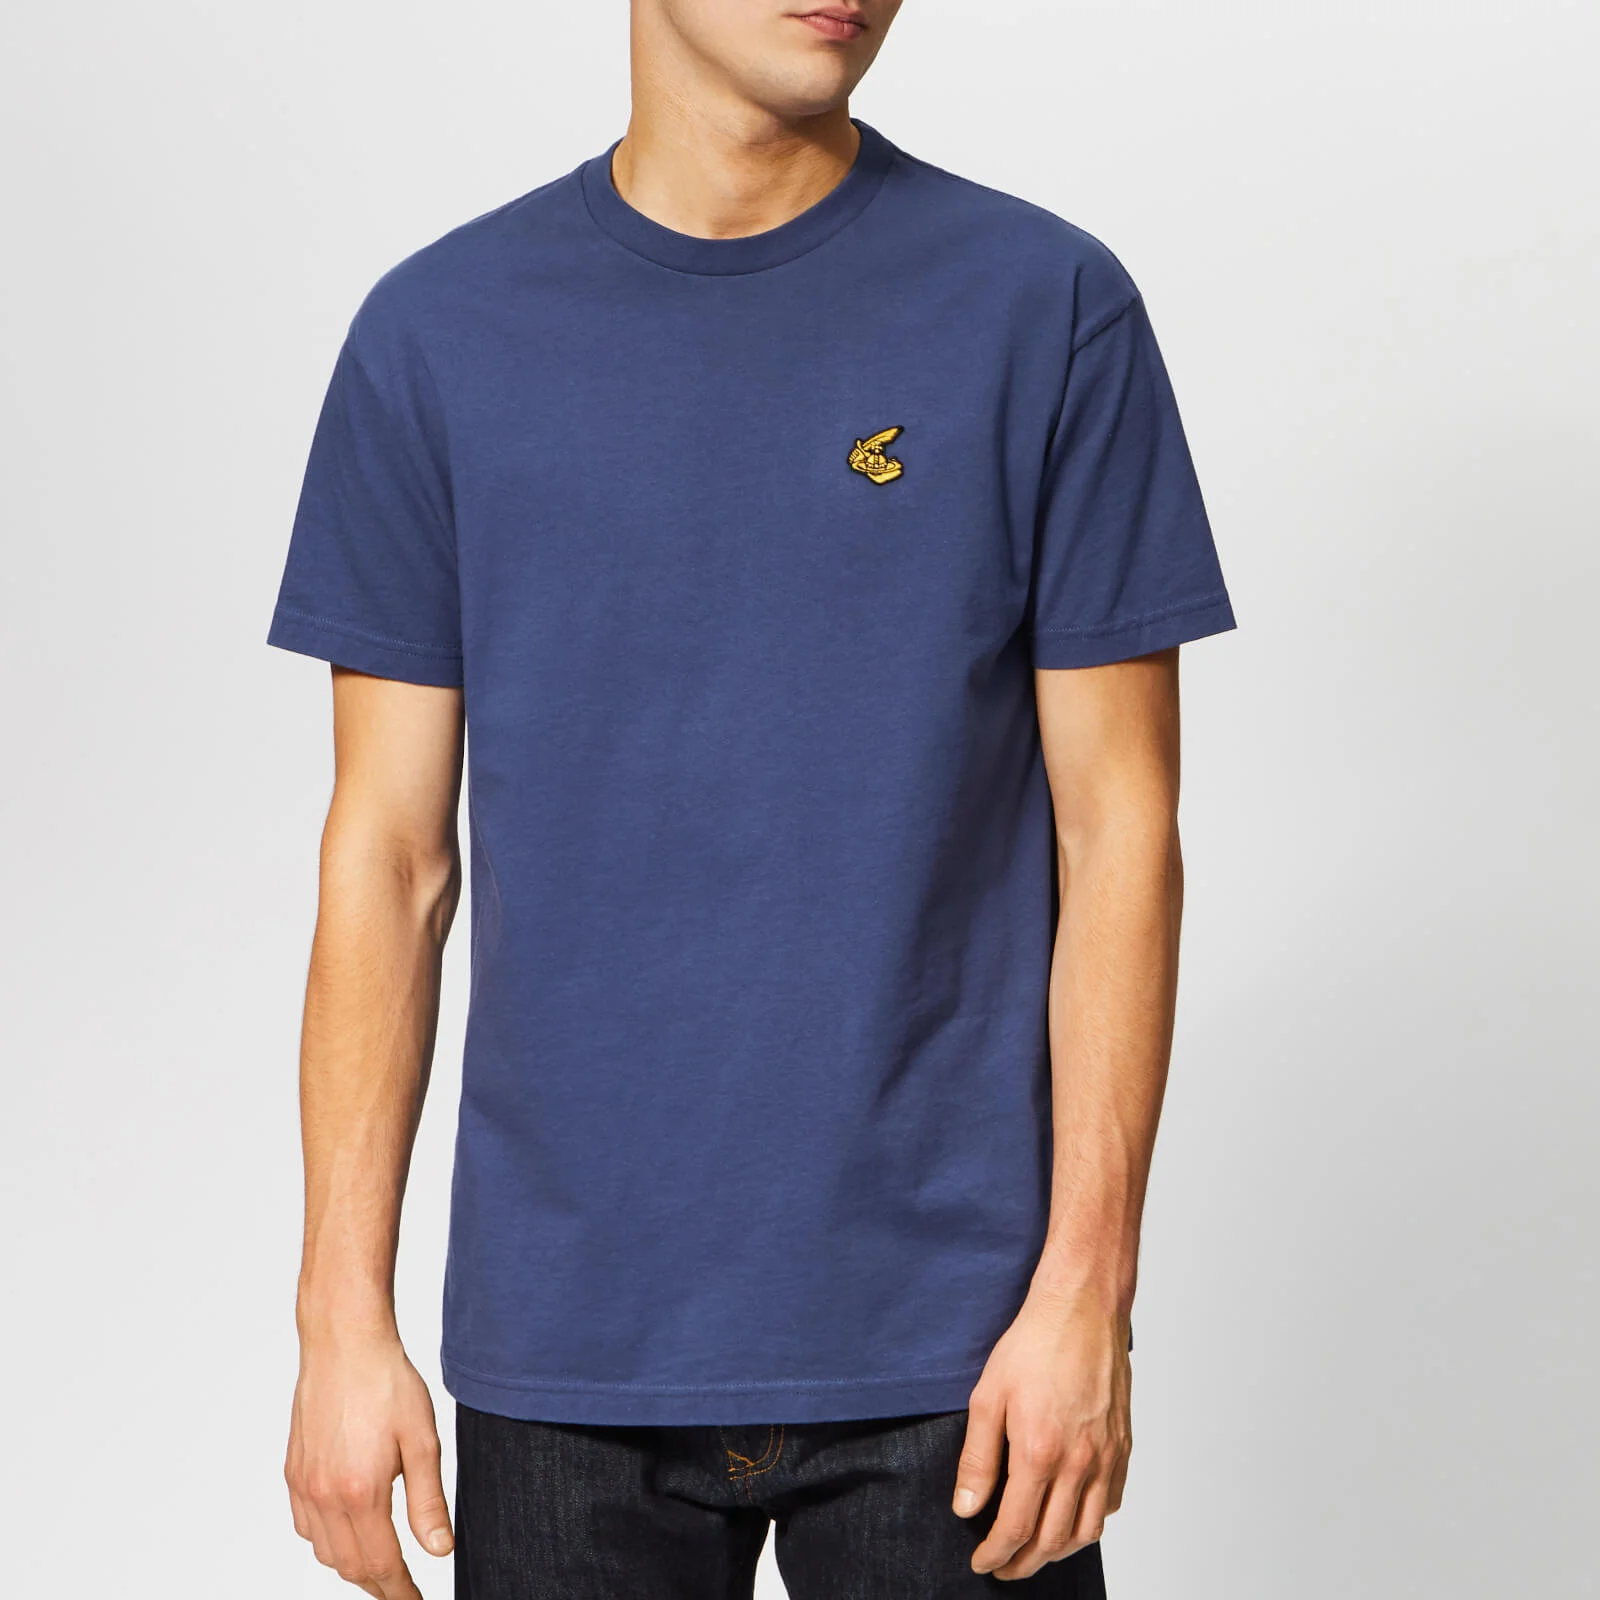 Vivienne Westwood Anglomania Men's Boxy T-Shirt - Navy Image 1